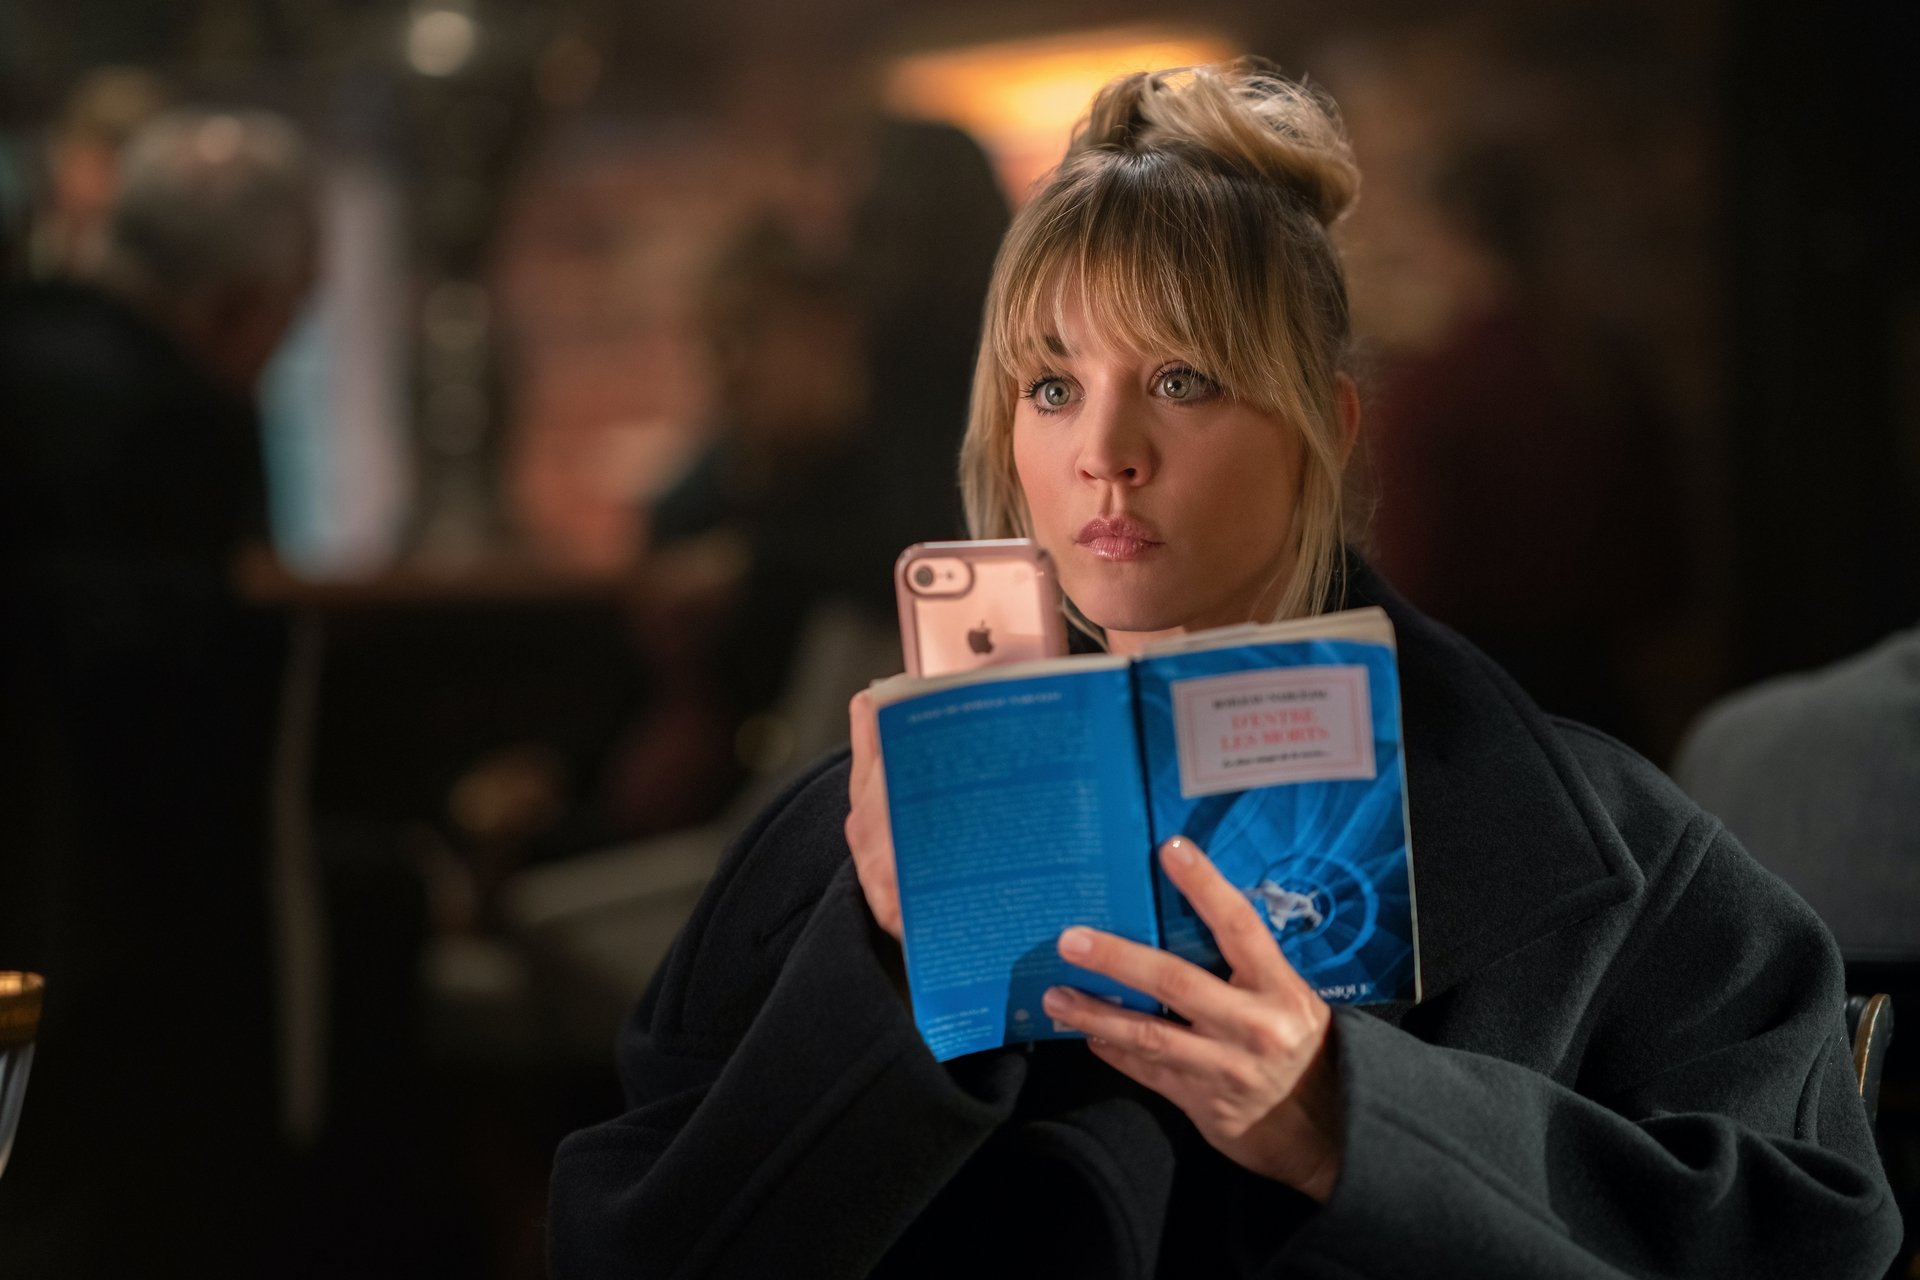 Kaley Cuoco as Cassie Bowden in 'The Flight Attendant' Season 2 on HBO Max. She's recording something on her phone and holding a book up in front of it.